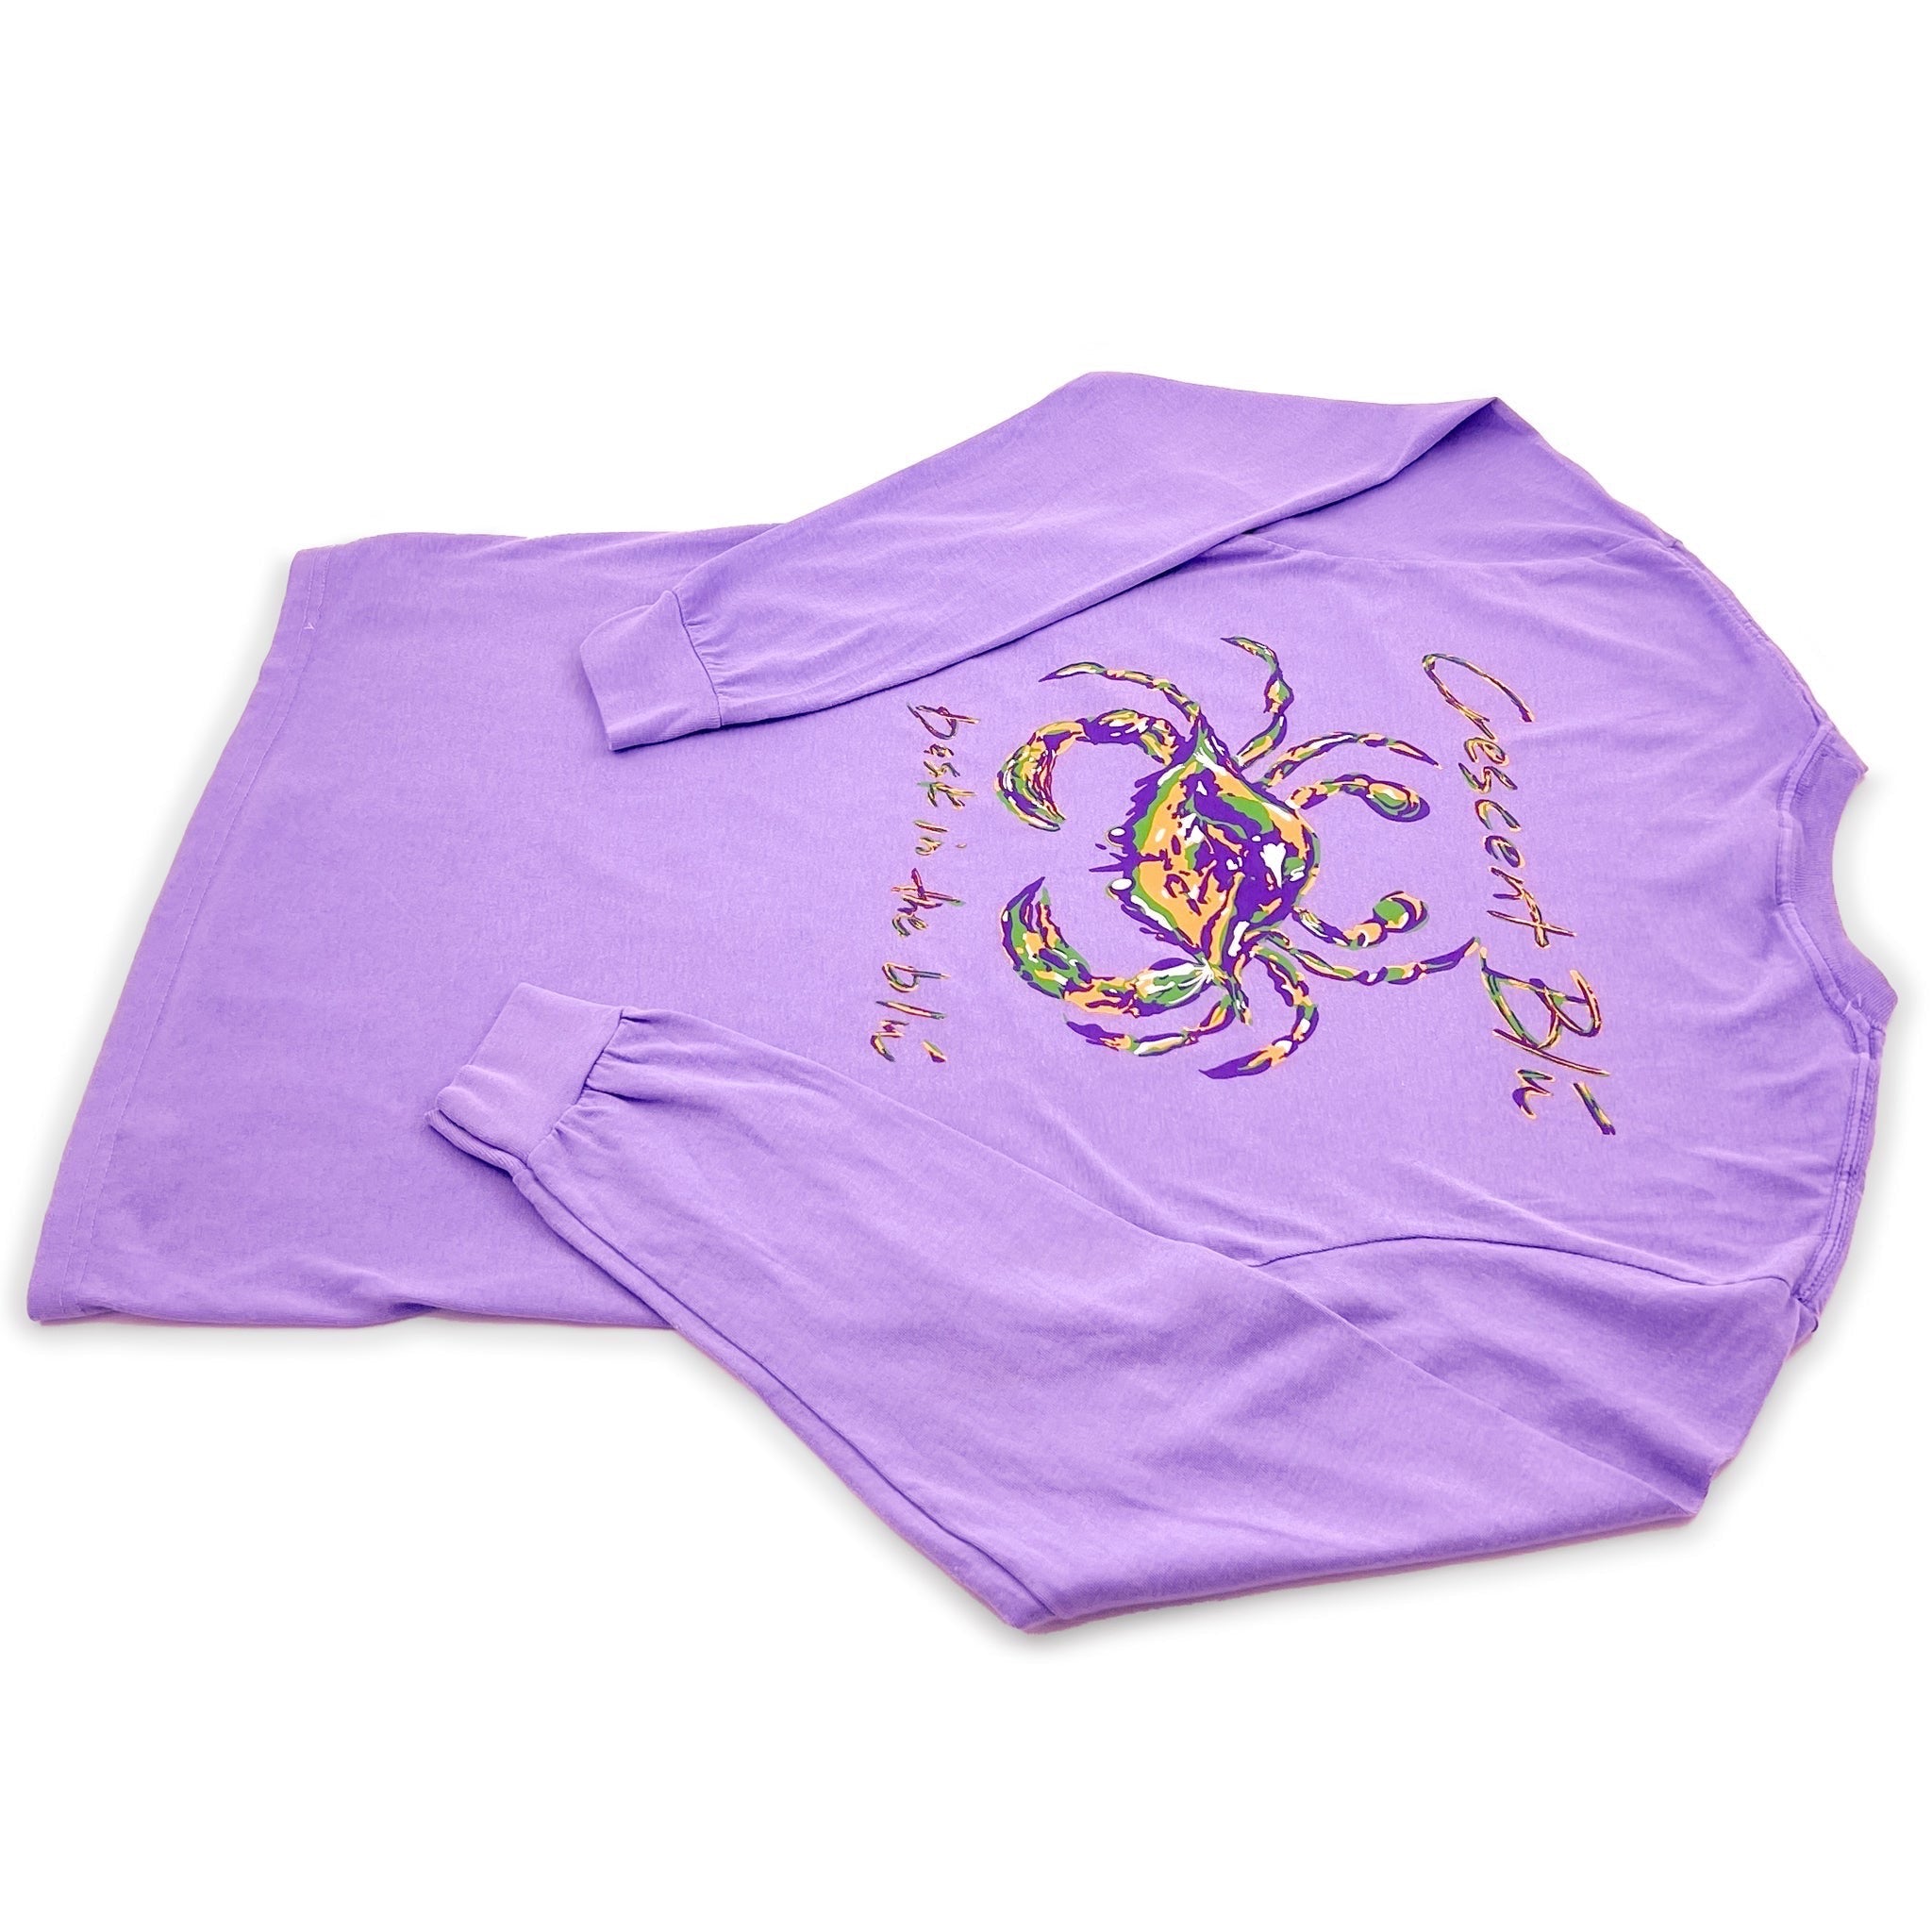 Back of a long sleeve violet tee shirt with a Mardi Gras colored crab on the back.